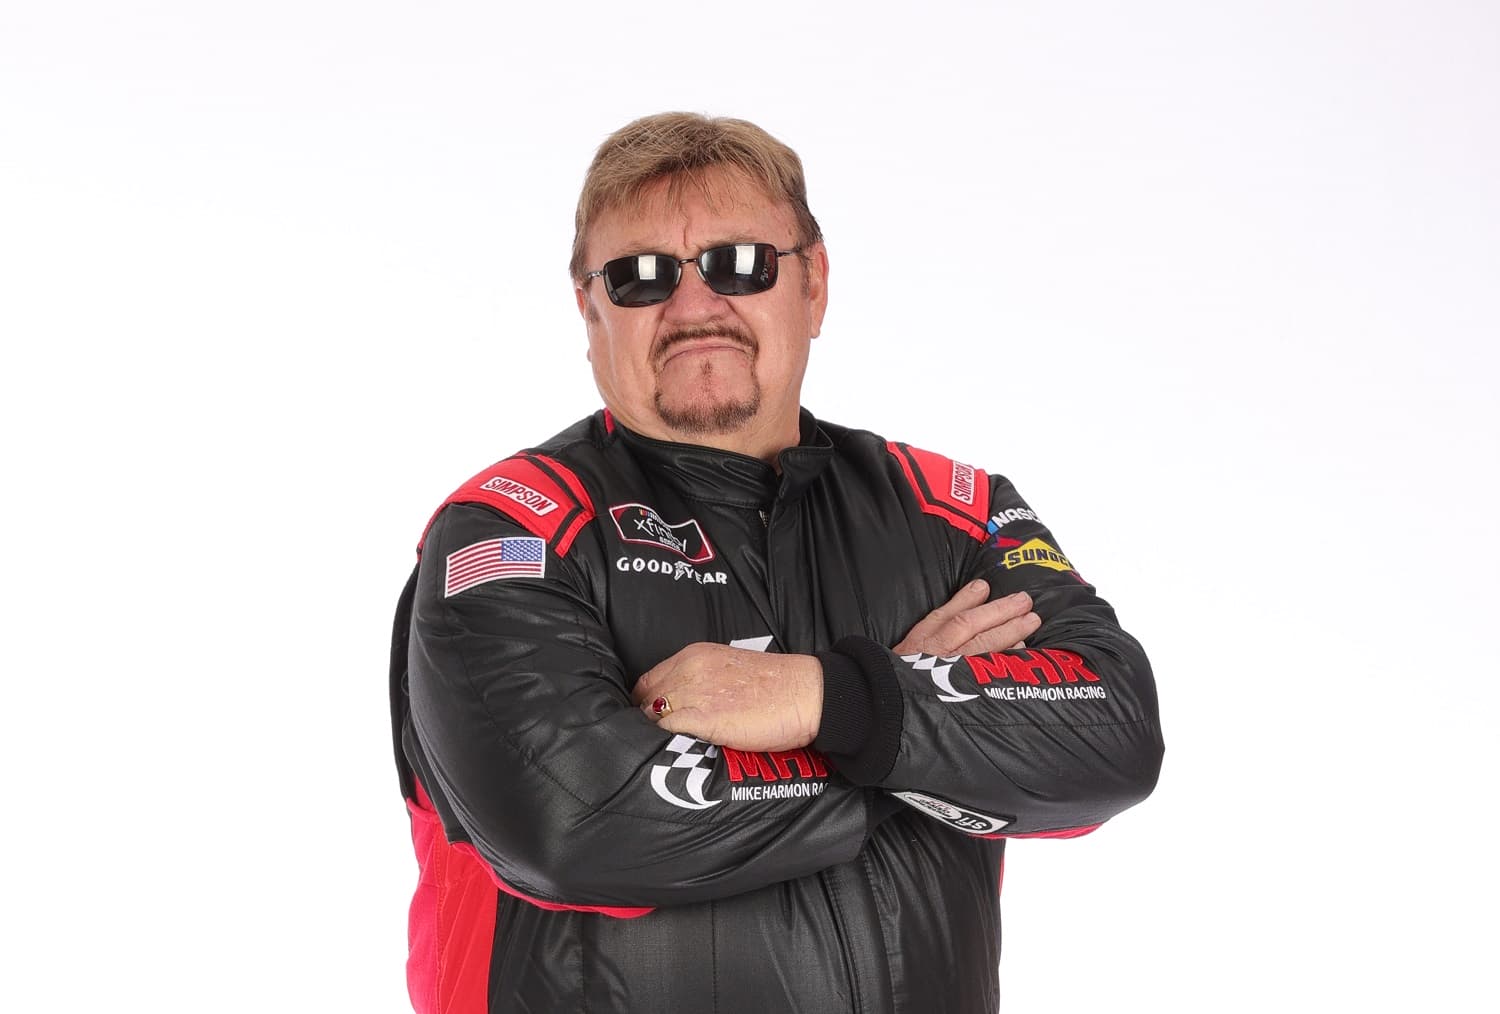 Mike Harmon poses for a photo at Daytona International Speedway on Feb. 13, 2020.